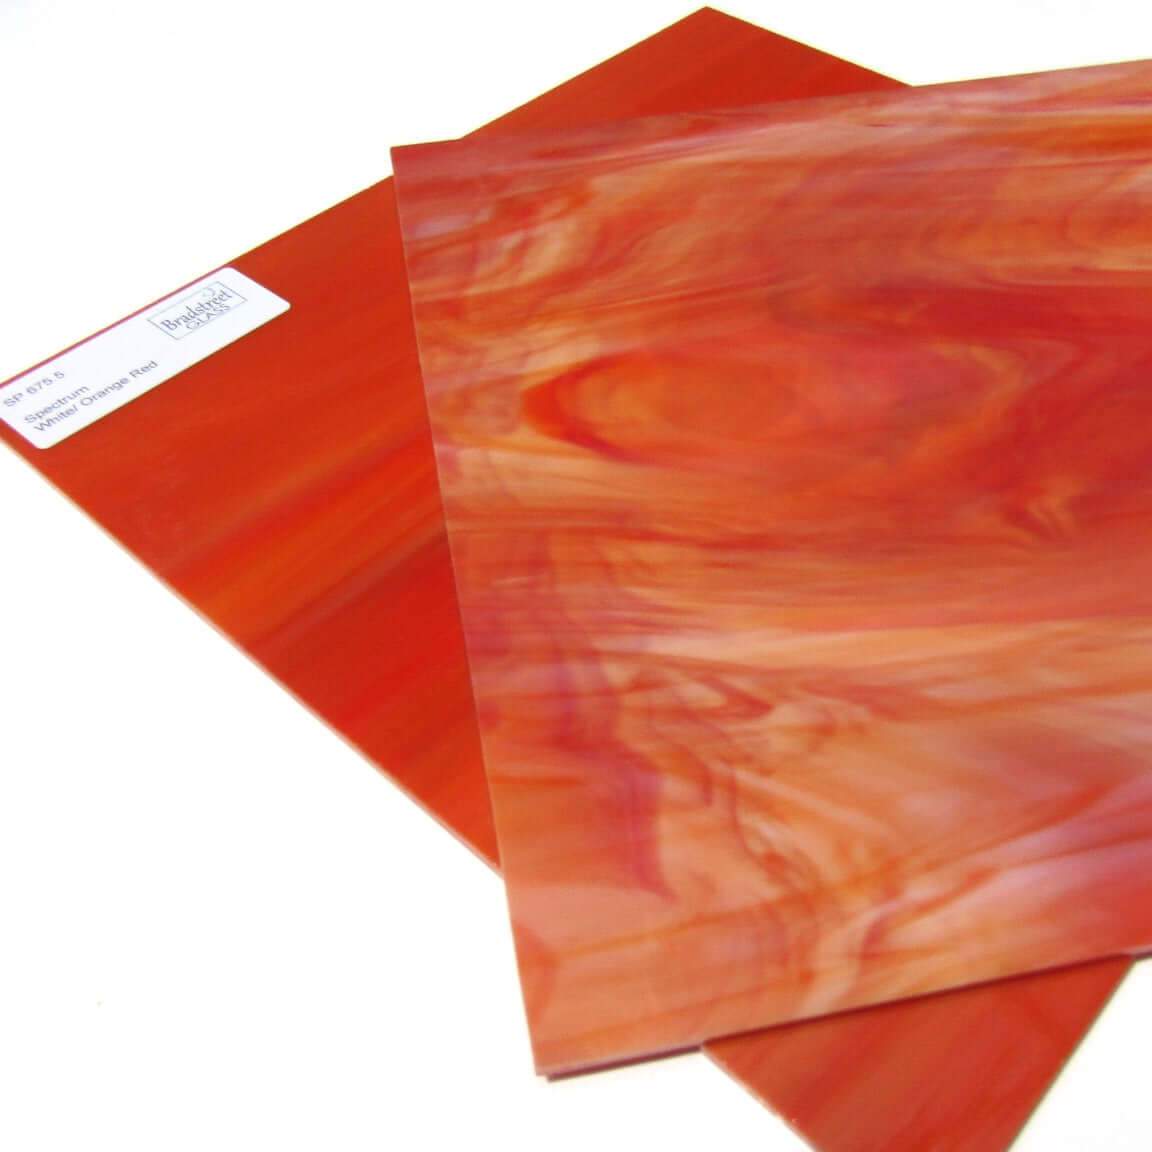 Spectrum SP 675.5 Stained Glass Sheet, White, Orange, and Red Streaky Swirled Opaque